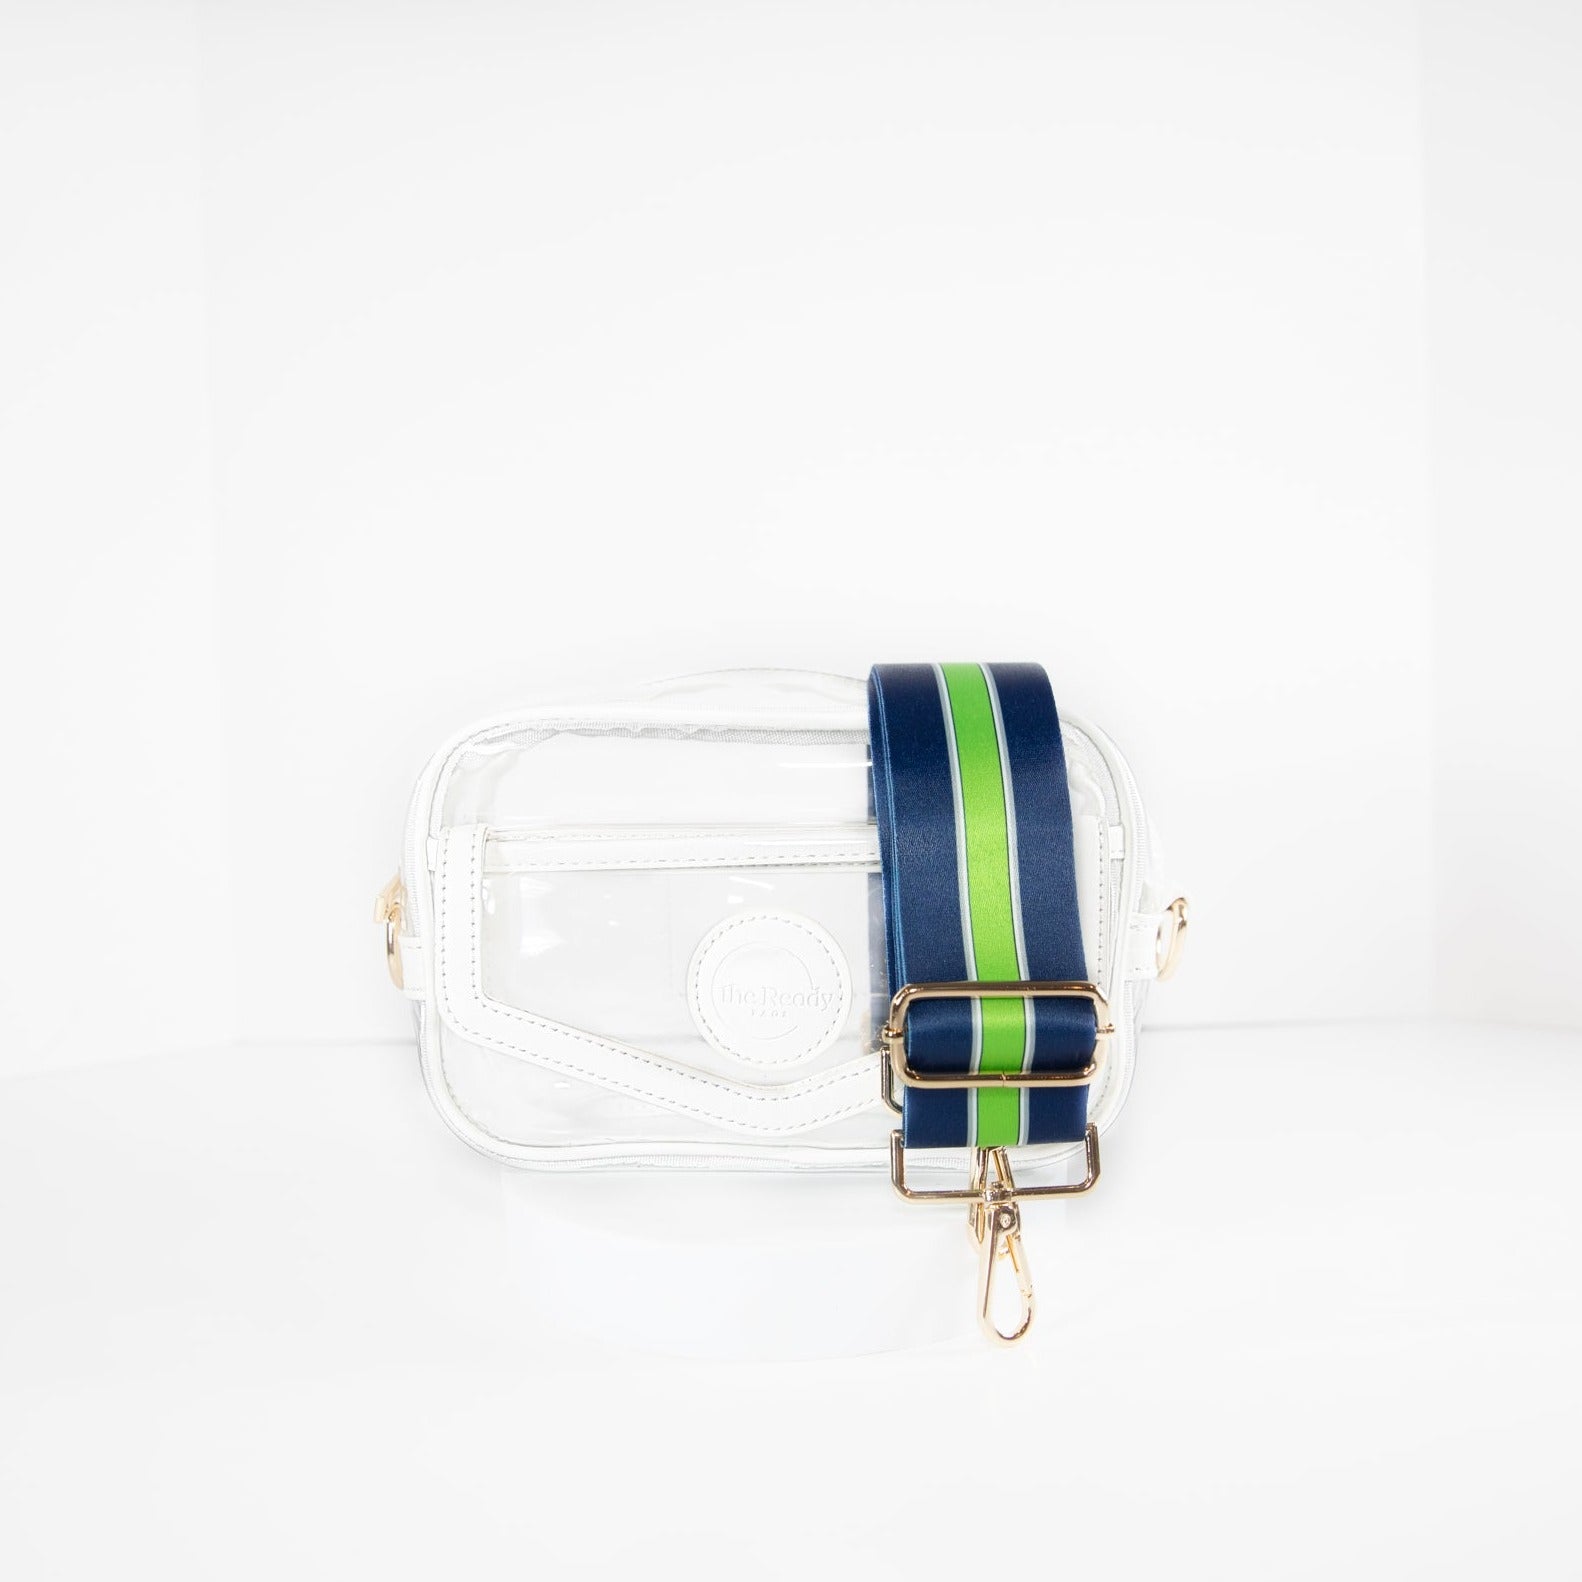 Clear Stadium Bag, in white, front facing with Seattle Seahawks colored strap